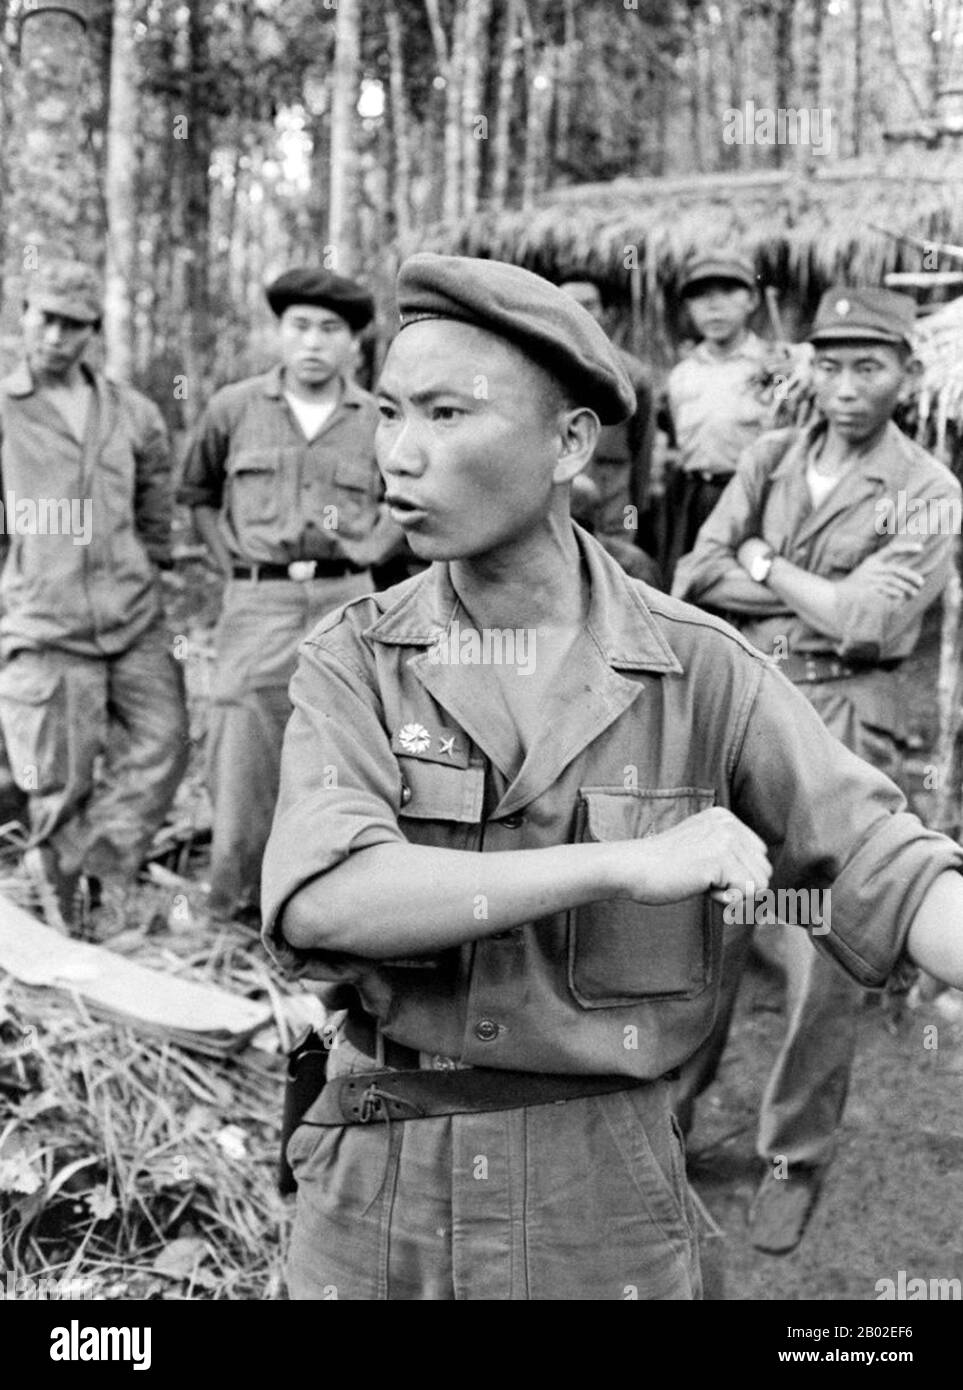 Vang Pao (Hmong: Vaj Pov; 8 December 1929 – 6 January 2011) was a Lieutenant General in the Royal Lao Army and leading figure in the American 'Secret War' in Laos (1964-1973). He was a leader in the Hmong American community in the United States. Stock Photo